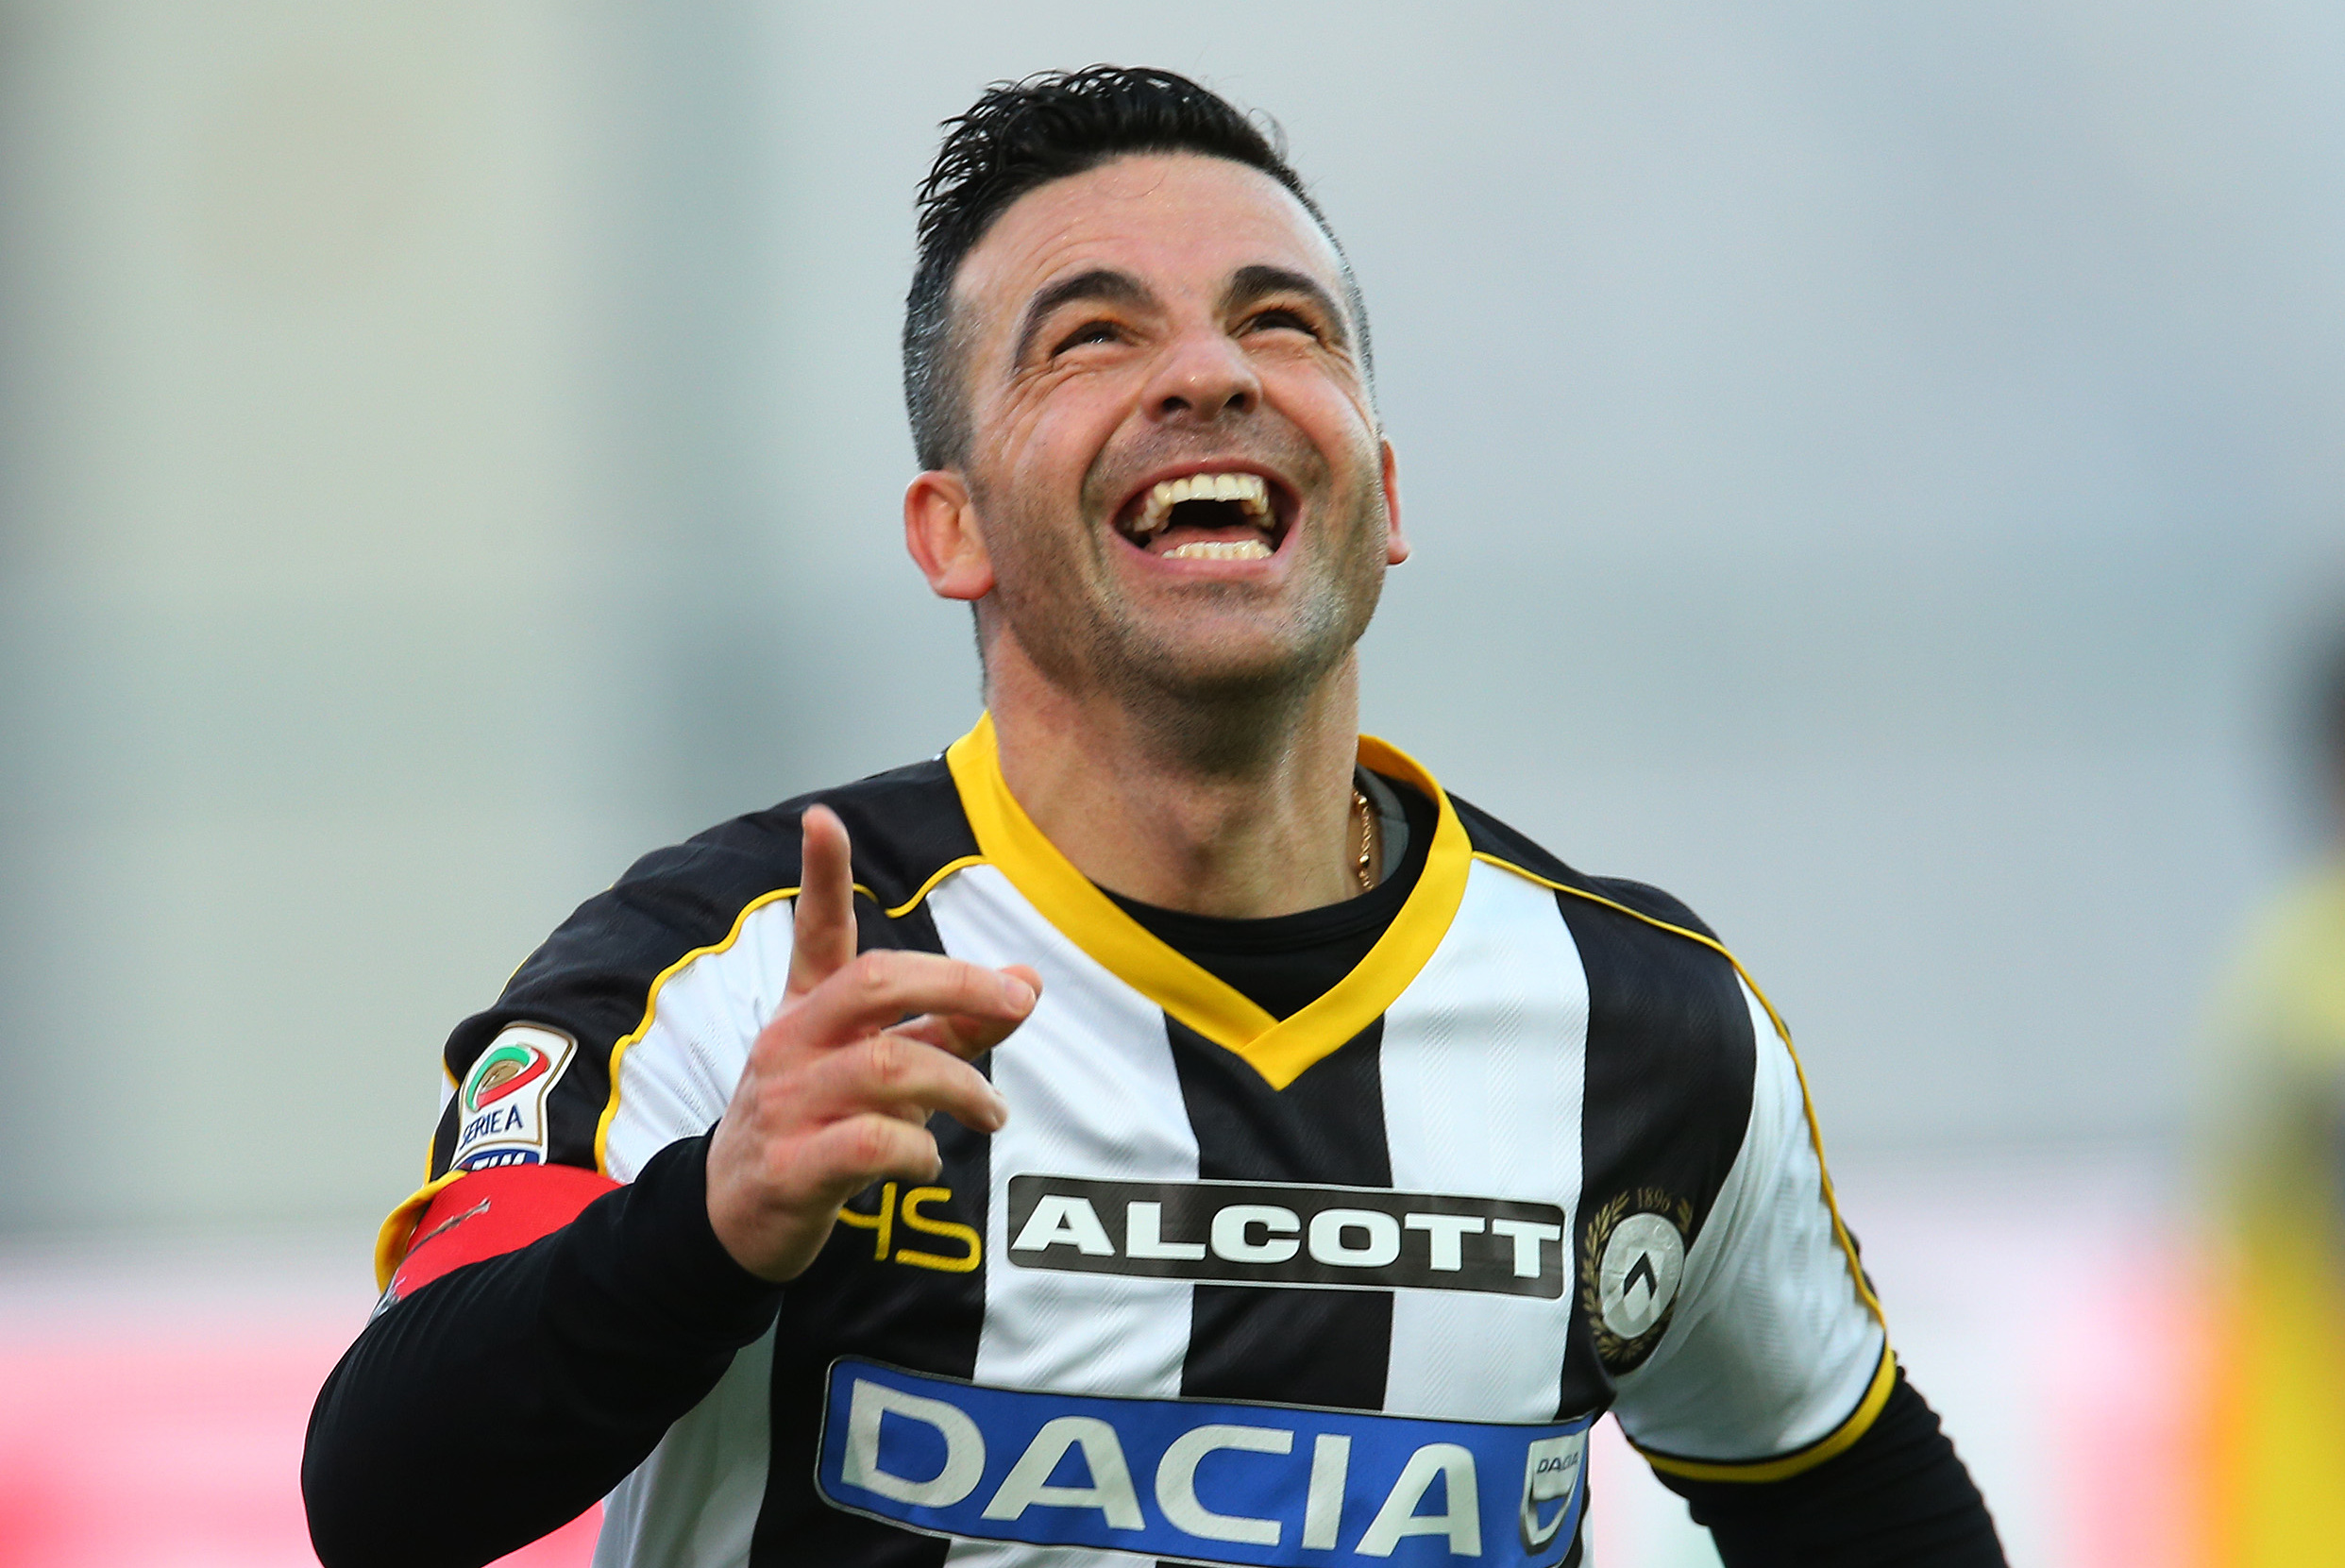 Natale Di Natale.Antonio Di Natale Reminds Us Why Football Is About More Than Just Trophies Bleacher Report Latest News Videos And Highlights